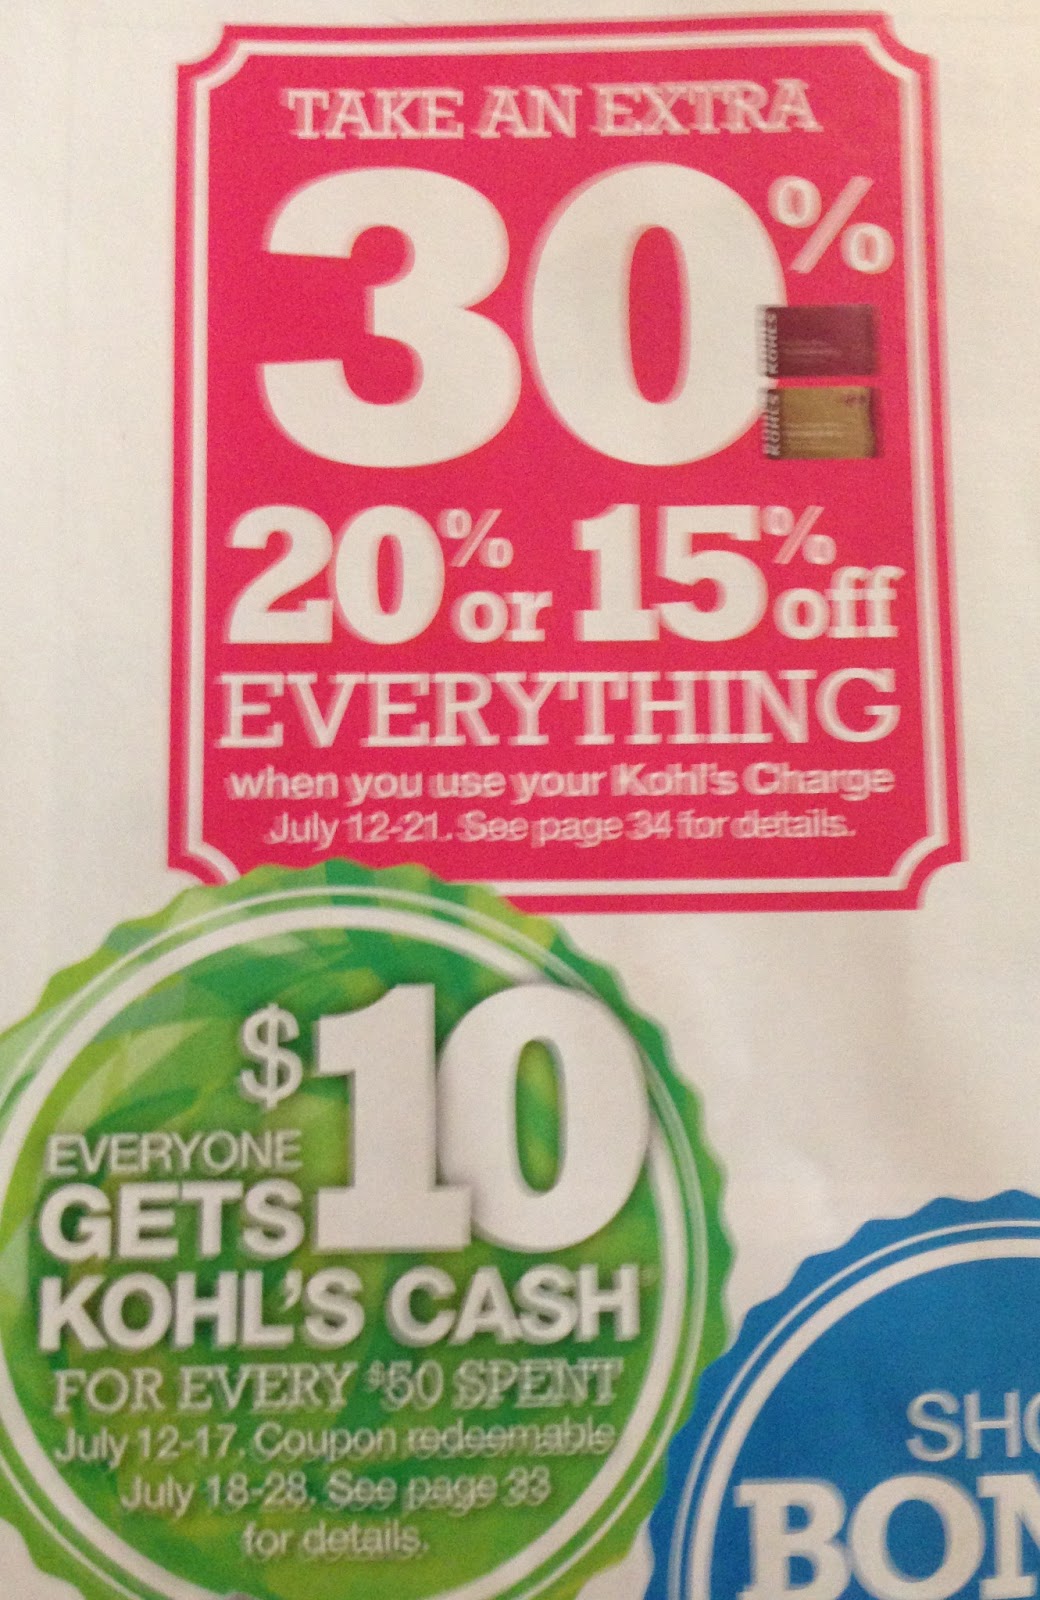 30% off everything at Kohl's for charge card holders Aug 9 to 18